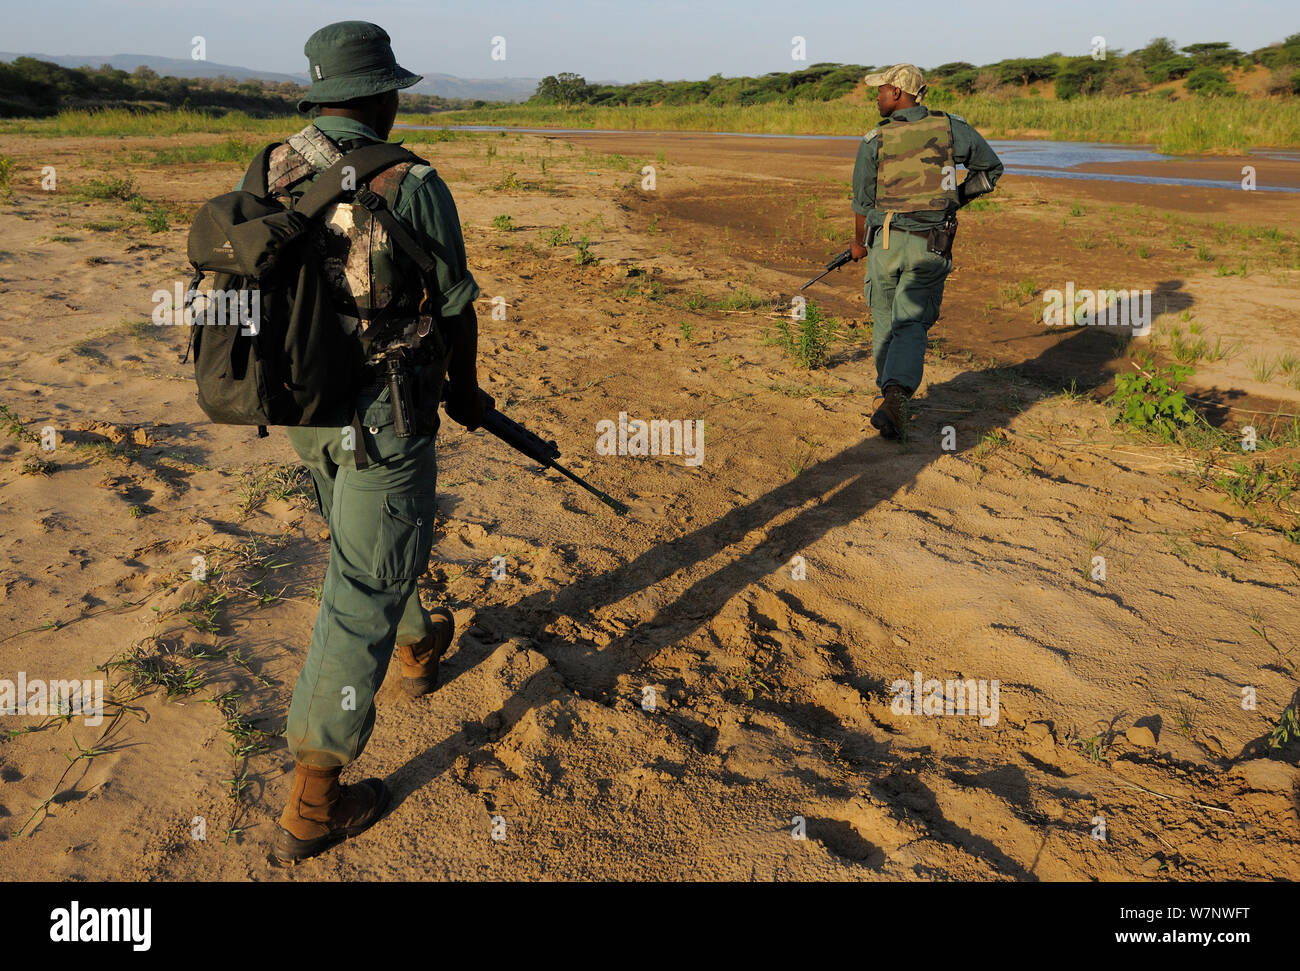 The anti poaching patrol in action, walking across landscape, iMfolozi National Park, South Africa October 2011 Stock Photo